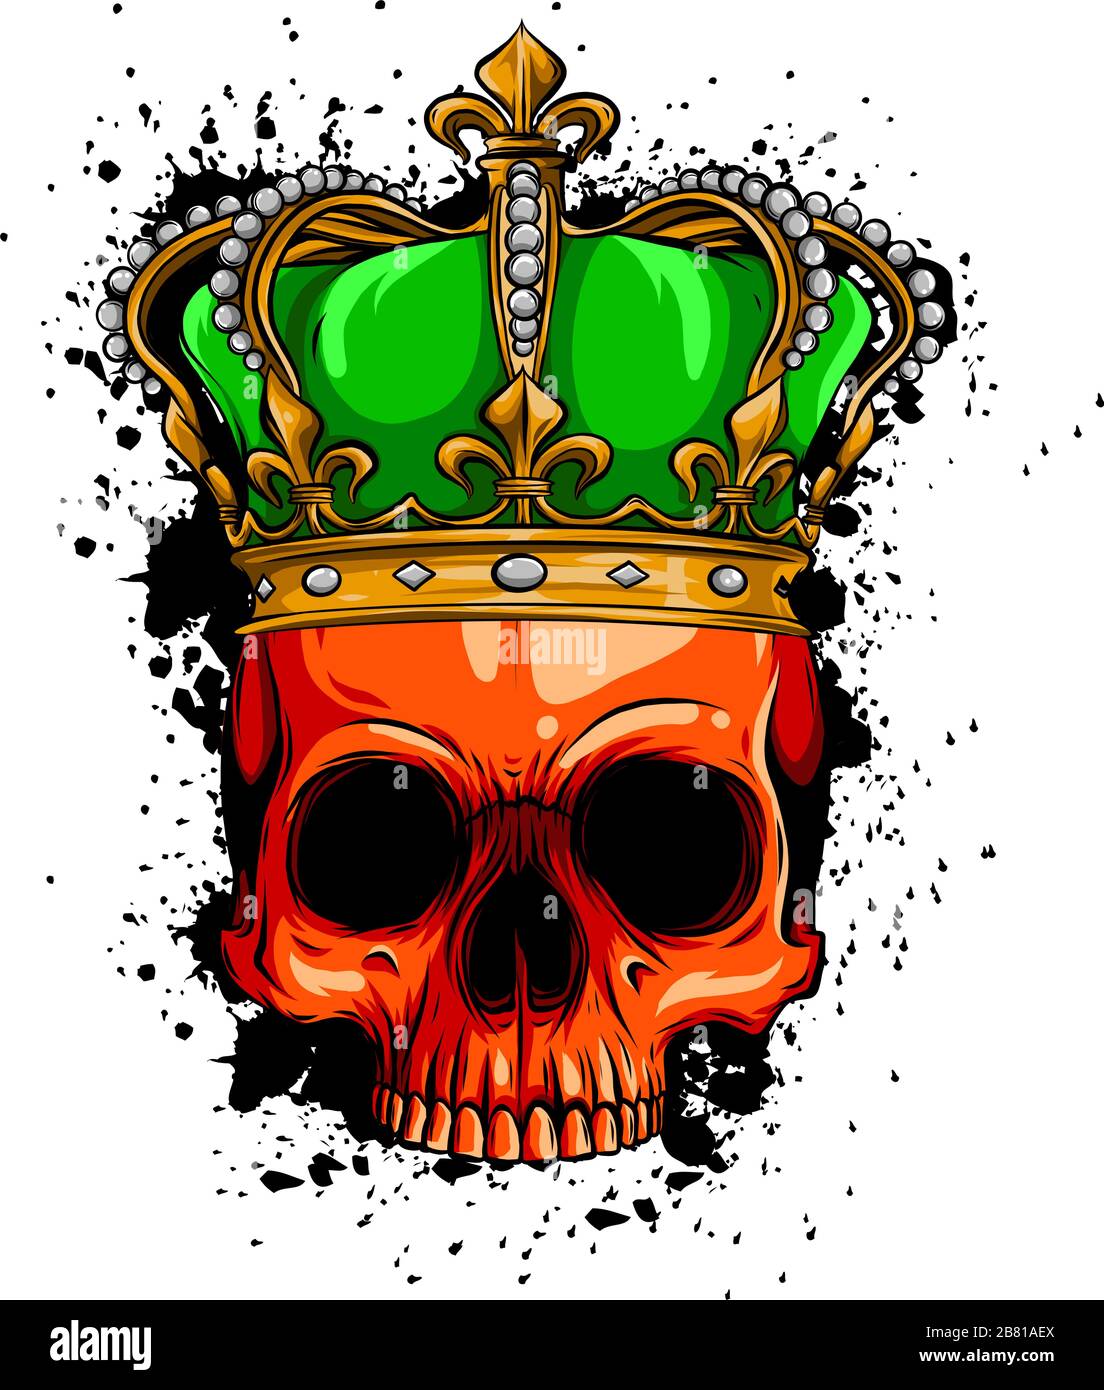 vector character - skull king and crossed royal scepters illustration Stock Vector